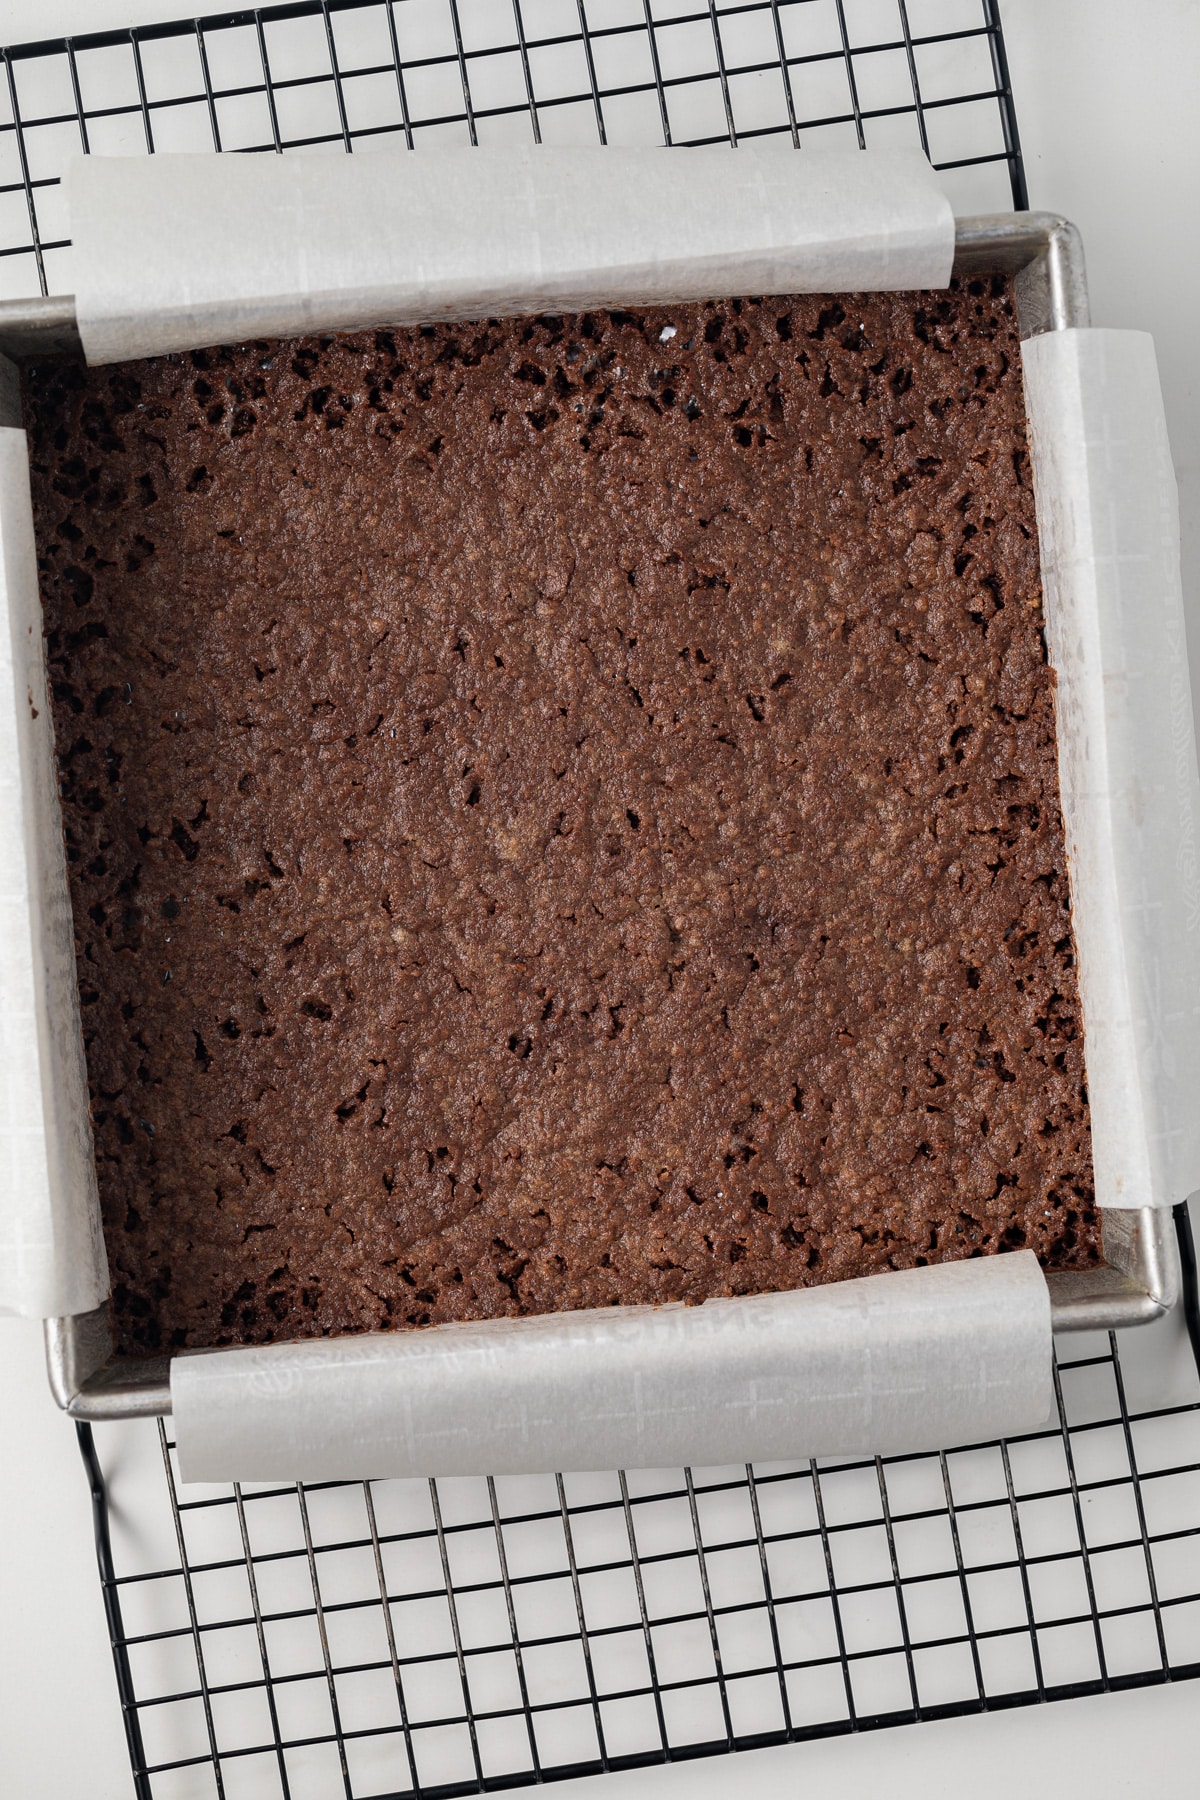 Chocolate shortbread crust baked in a square pan.